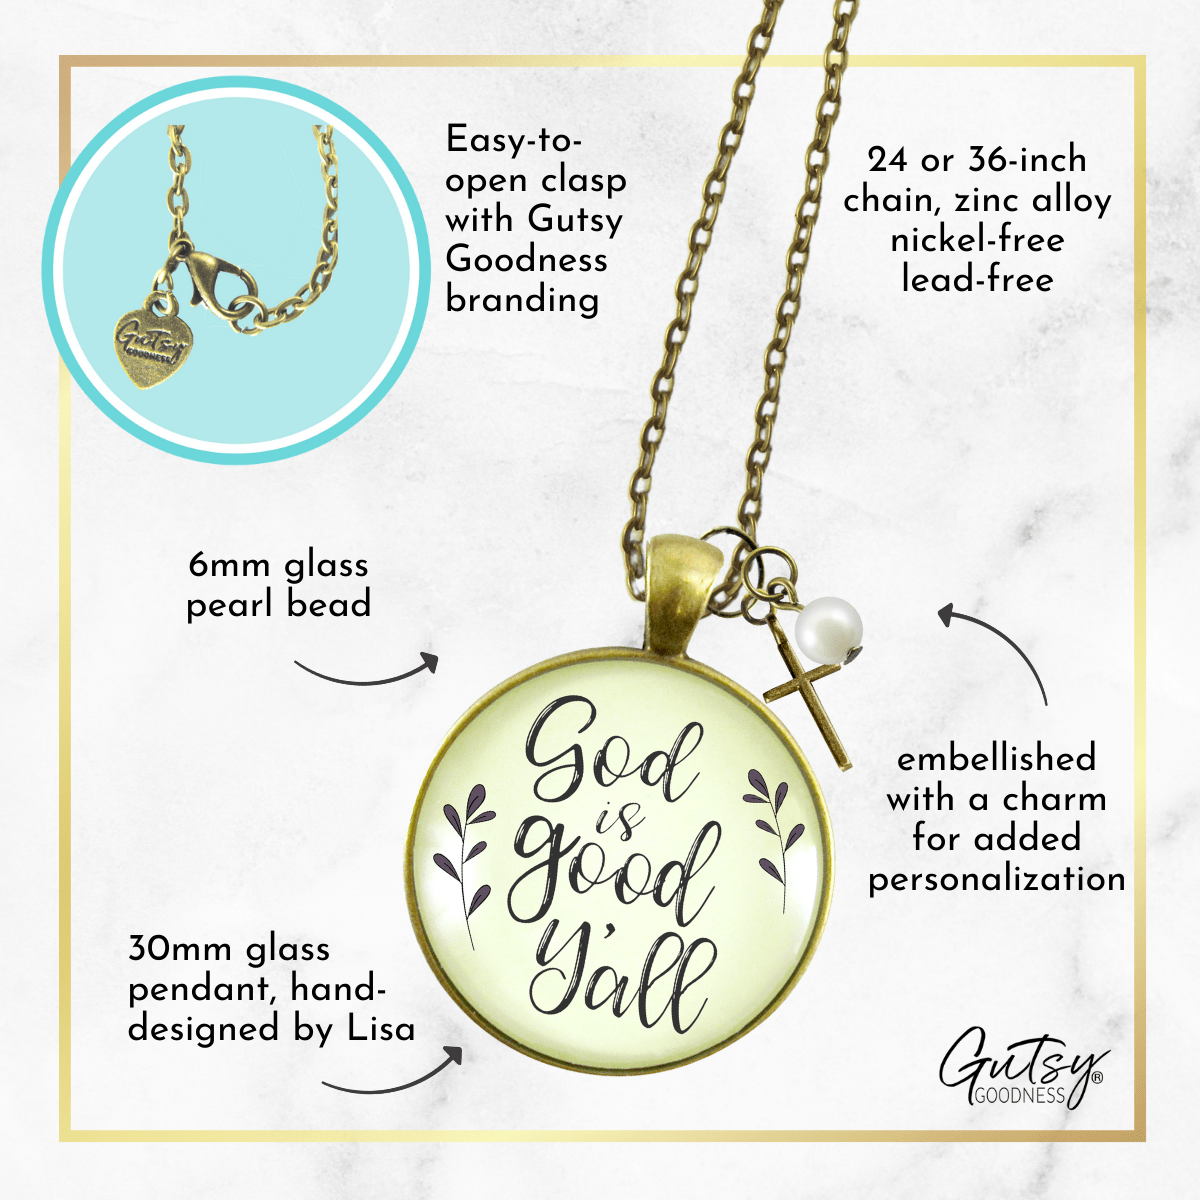 Gutsy Goodness God is Good Y'all Country Necklace Faith Jewelry Cross Charm - Gutsy Goodness Handmade Jewelry;God Is Good Y'all Country Necklace Faith Jewelry Cross Charm - Gutsy Goodness Handmade Jewelry Gifts